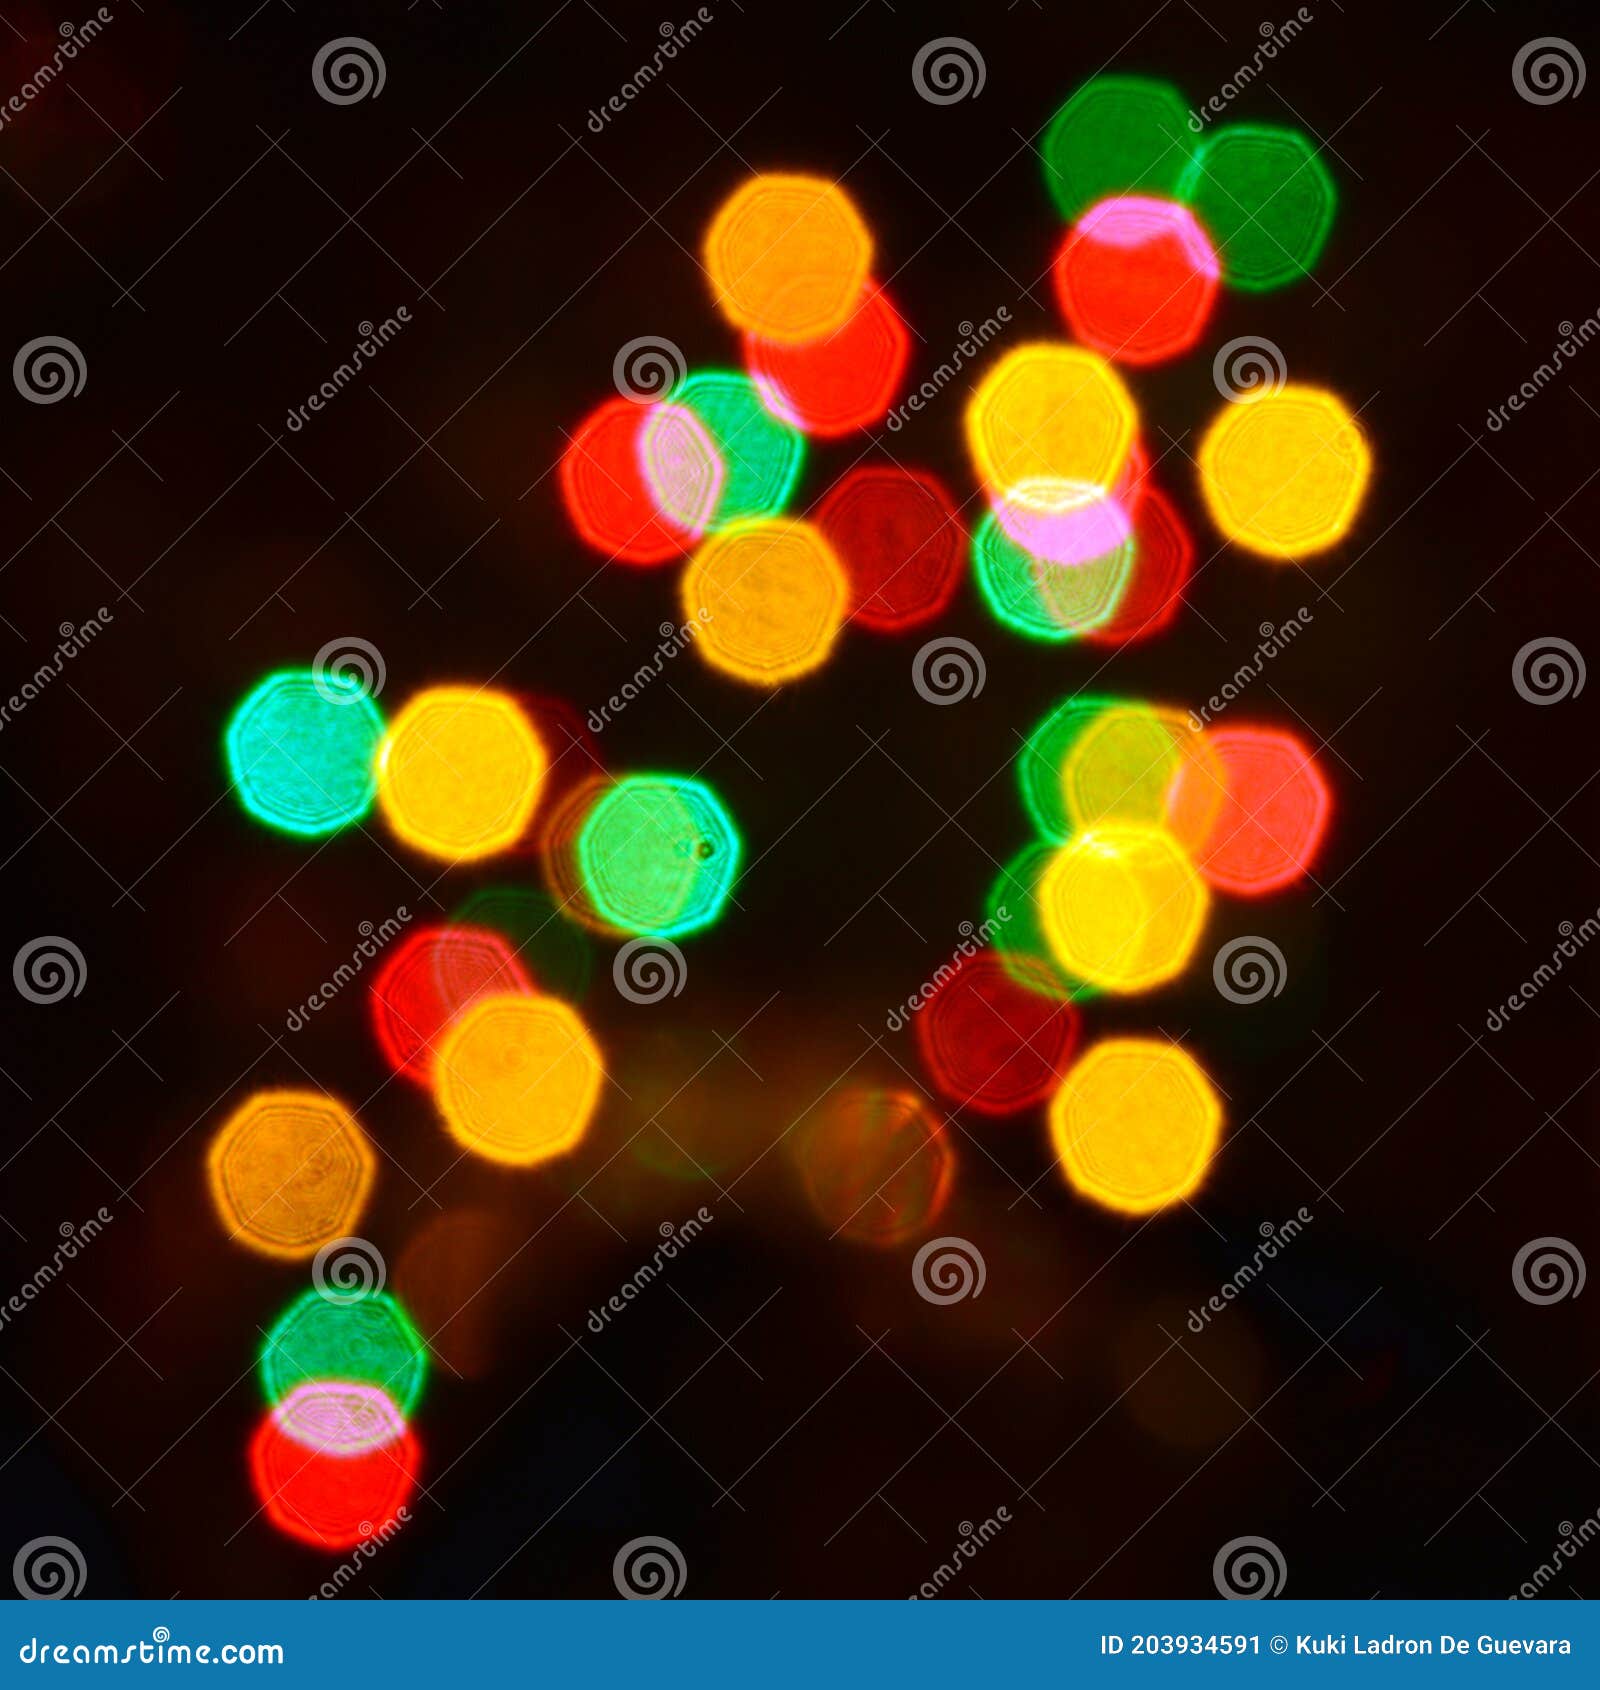 abstract and defocused background of christmas lights